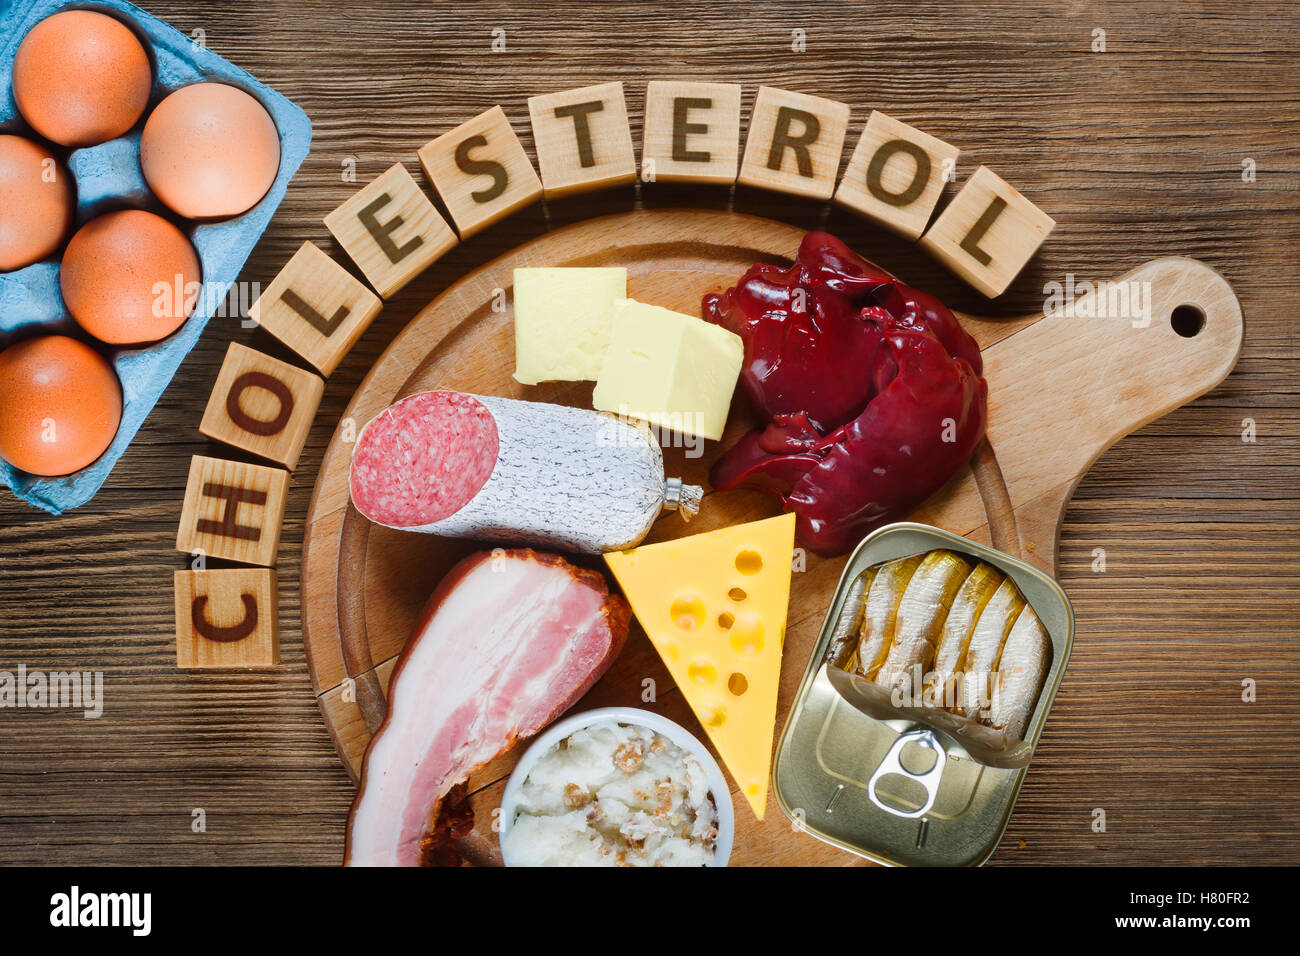 High-Cholesterol foods as eggs, liver, yellow cheese, butter, bacon, lard with onion, sardines in oil. Wooden table as backgroun Stock Photo